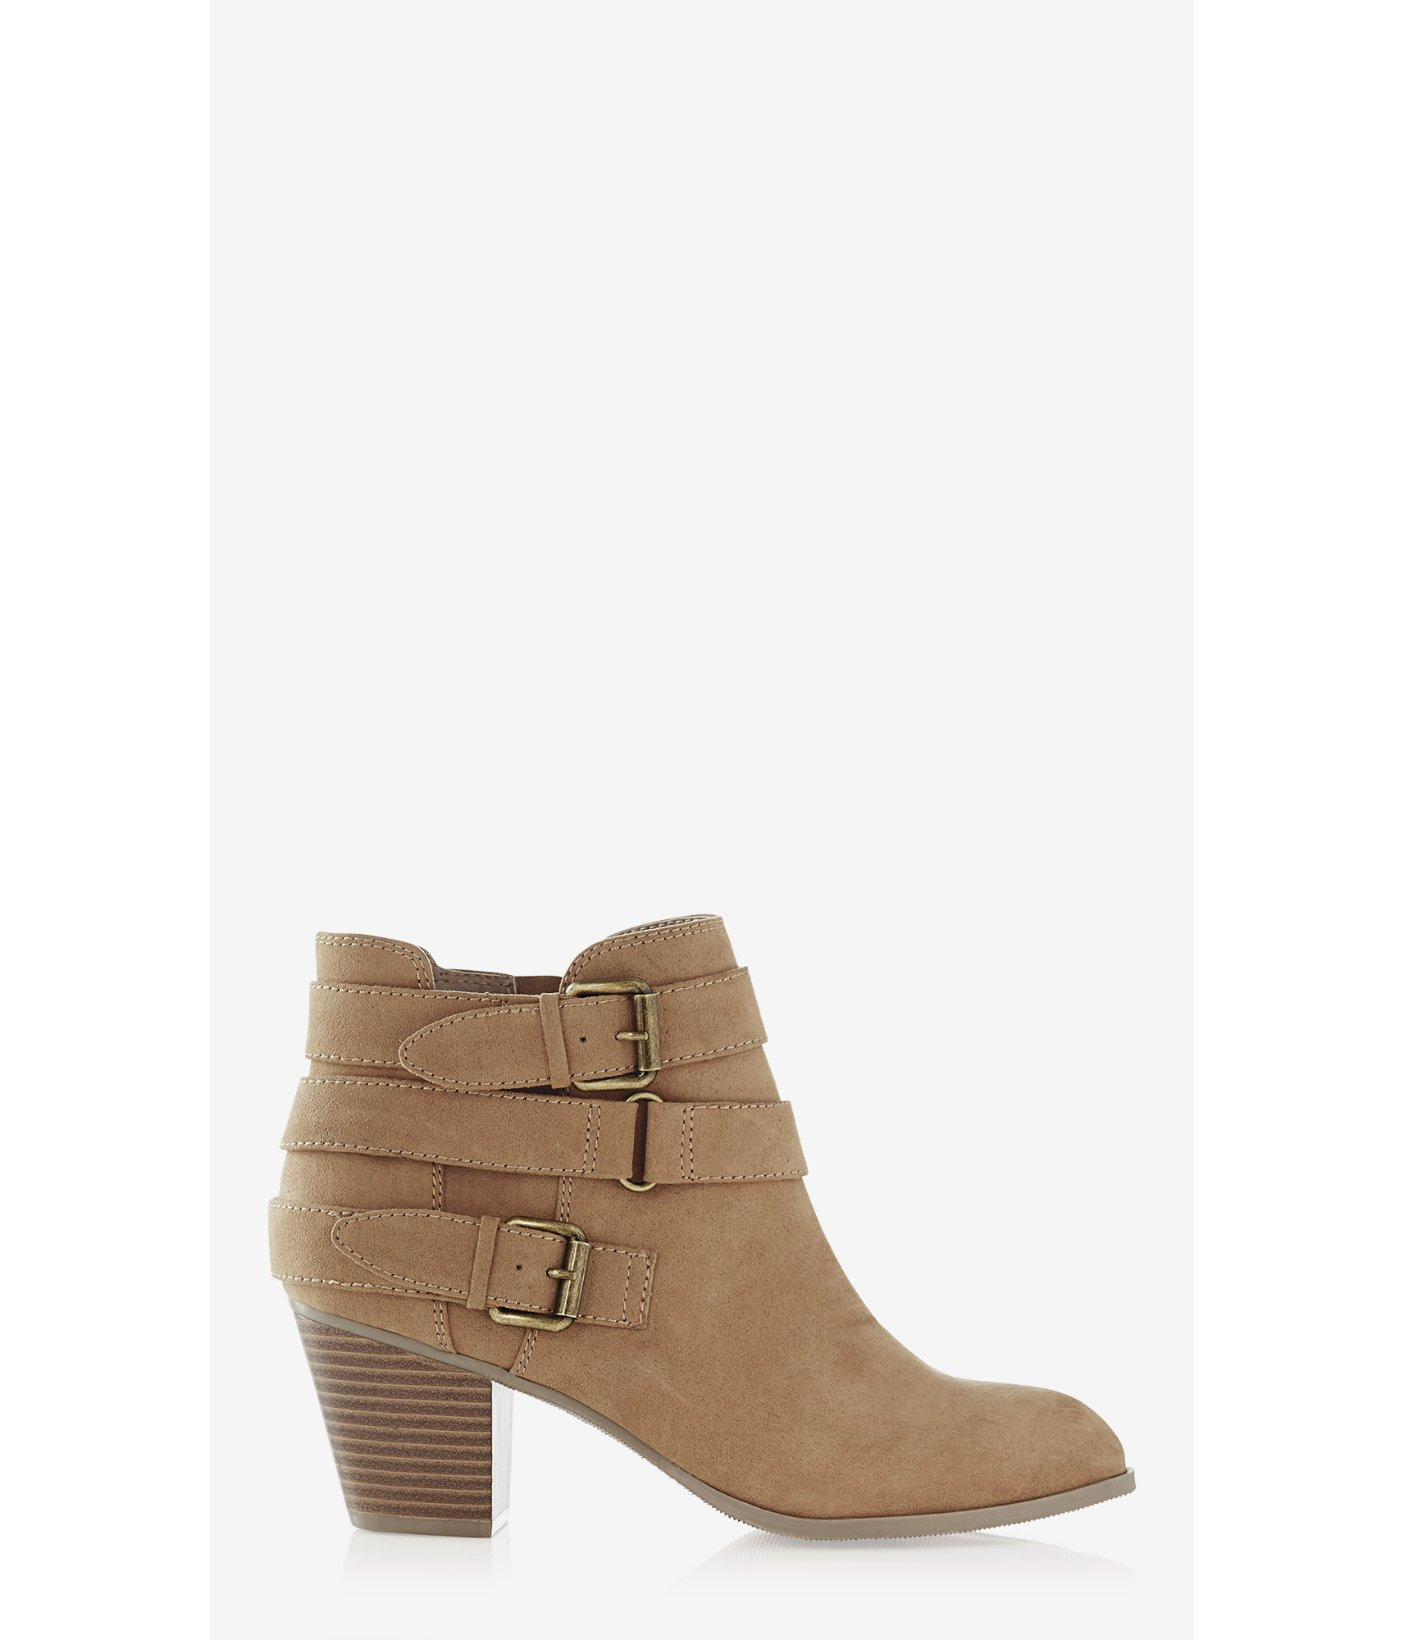 Lyst - Express Triple Strap Heeled Bootie in Natural